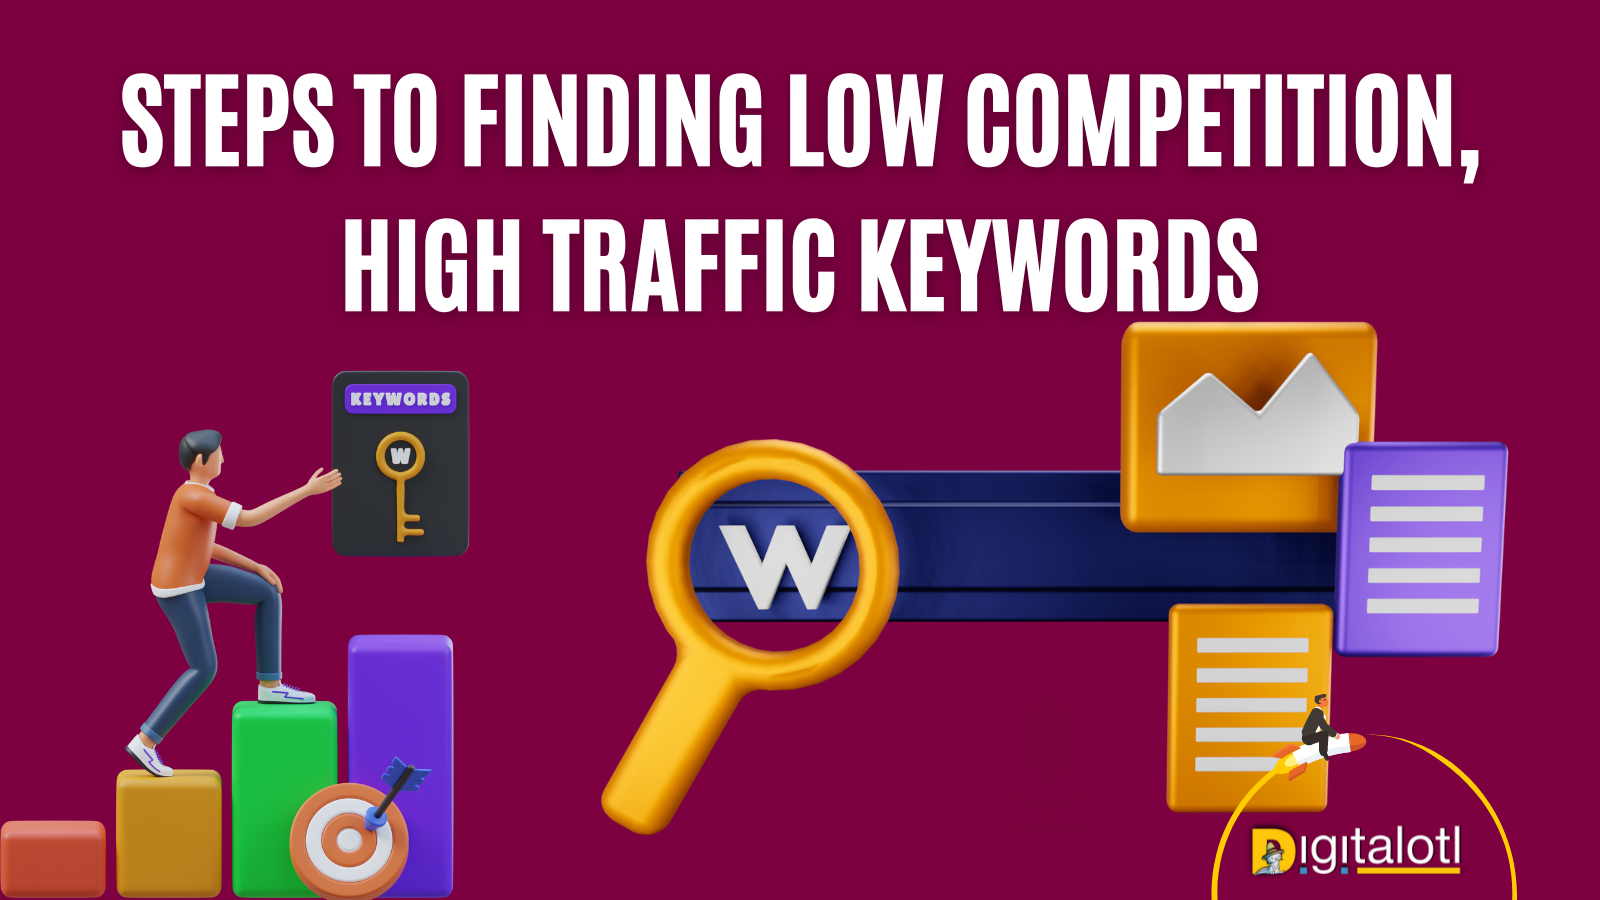 Step-by-Step Guide to Finding Low Competition, High Traffic Keywords